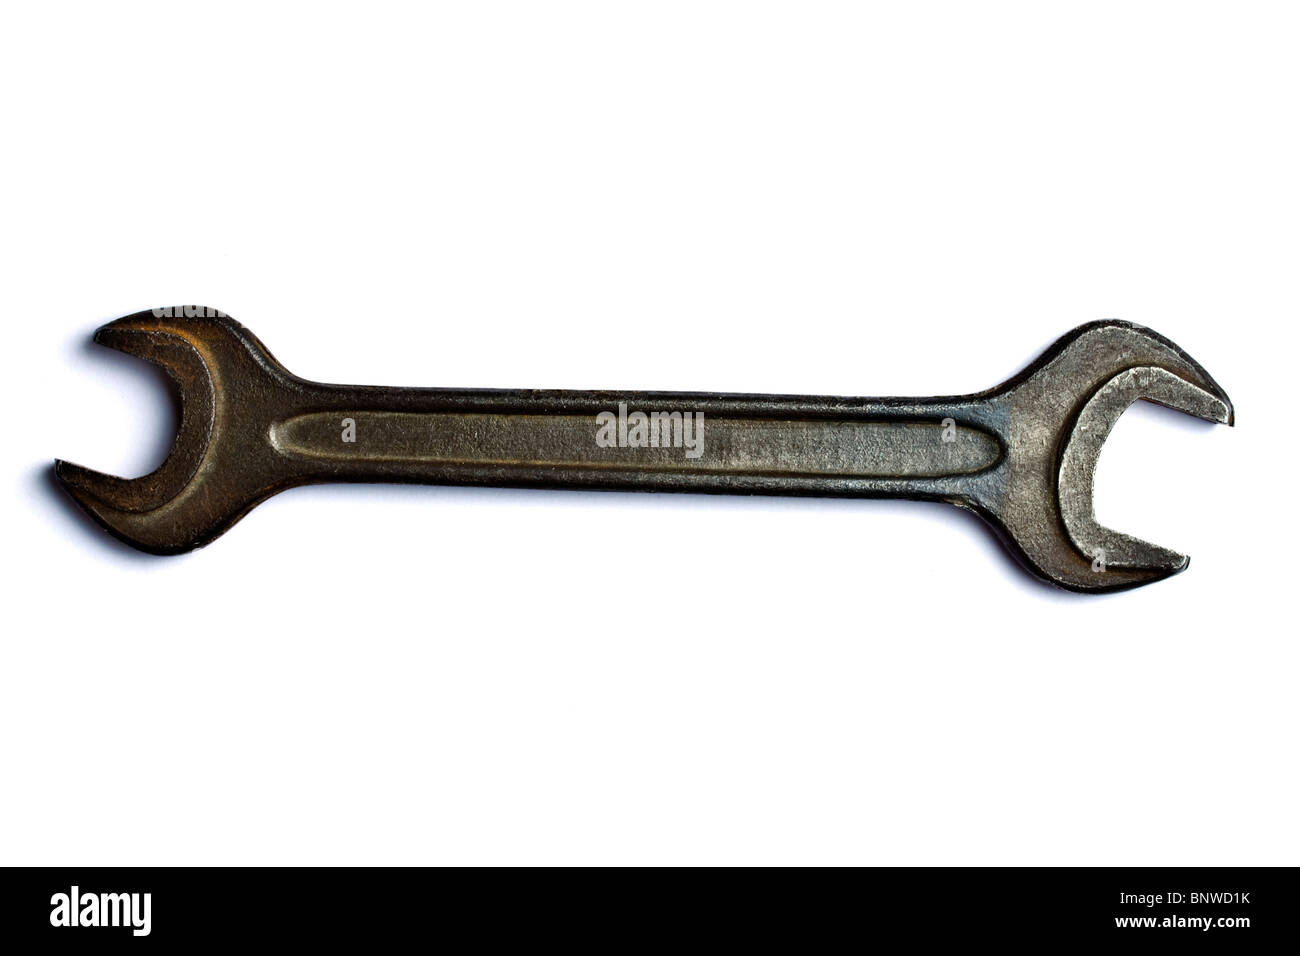 An old wrench isolated on white background Stock Photo